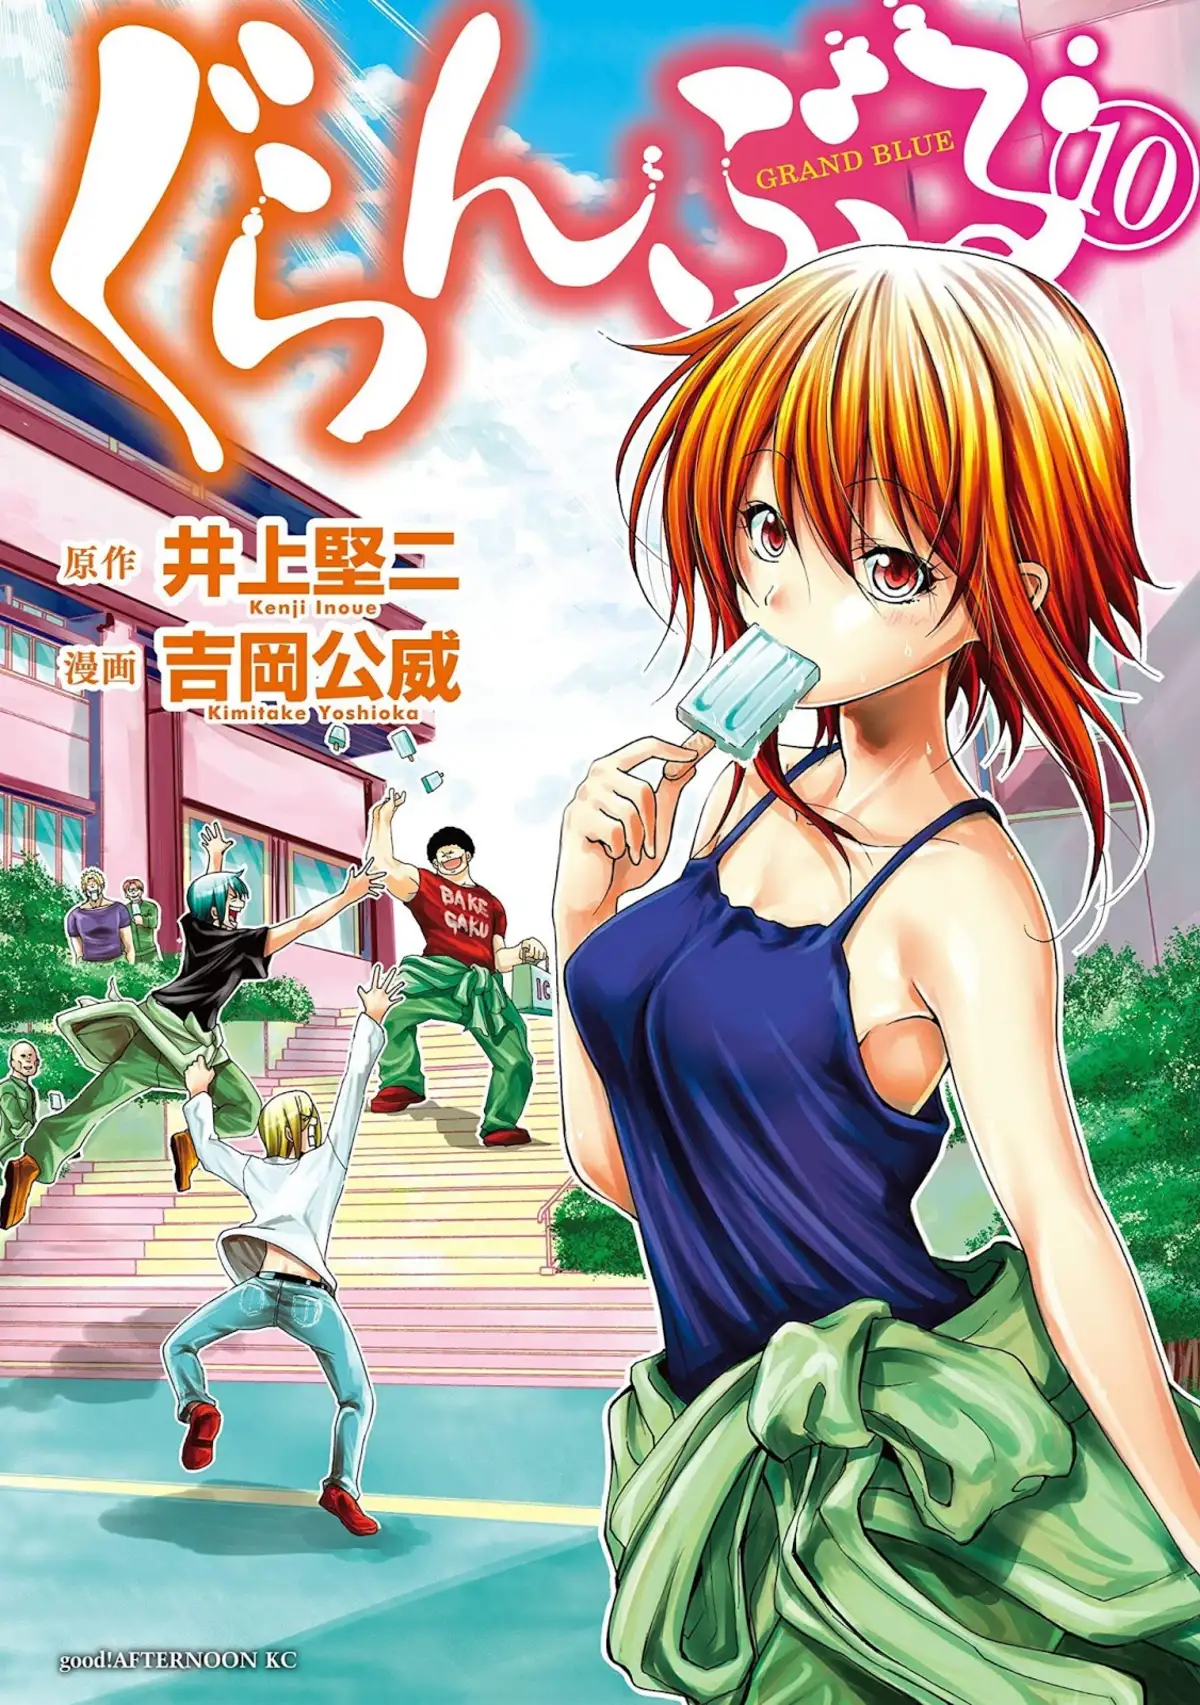 Grand Blue Volume 10 page 1